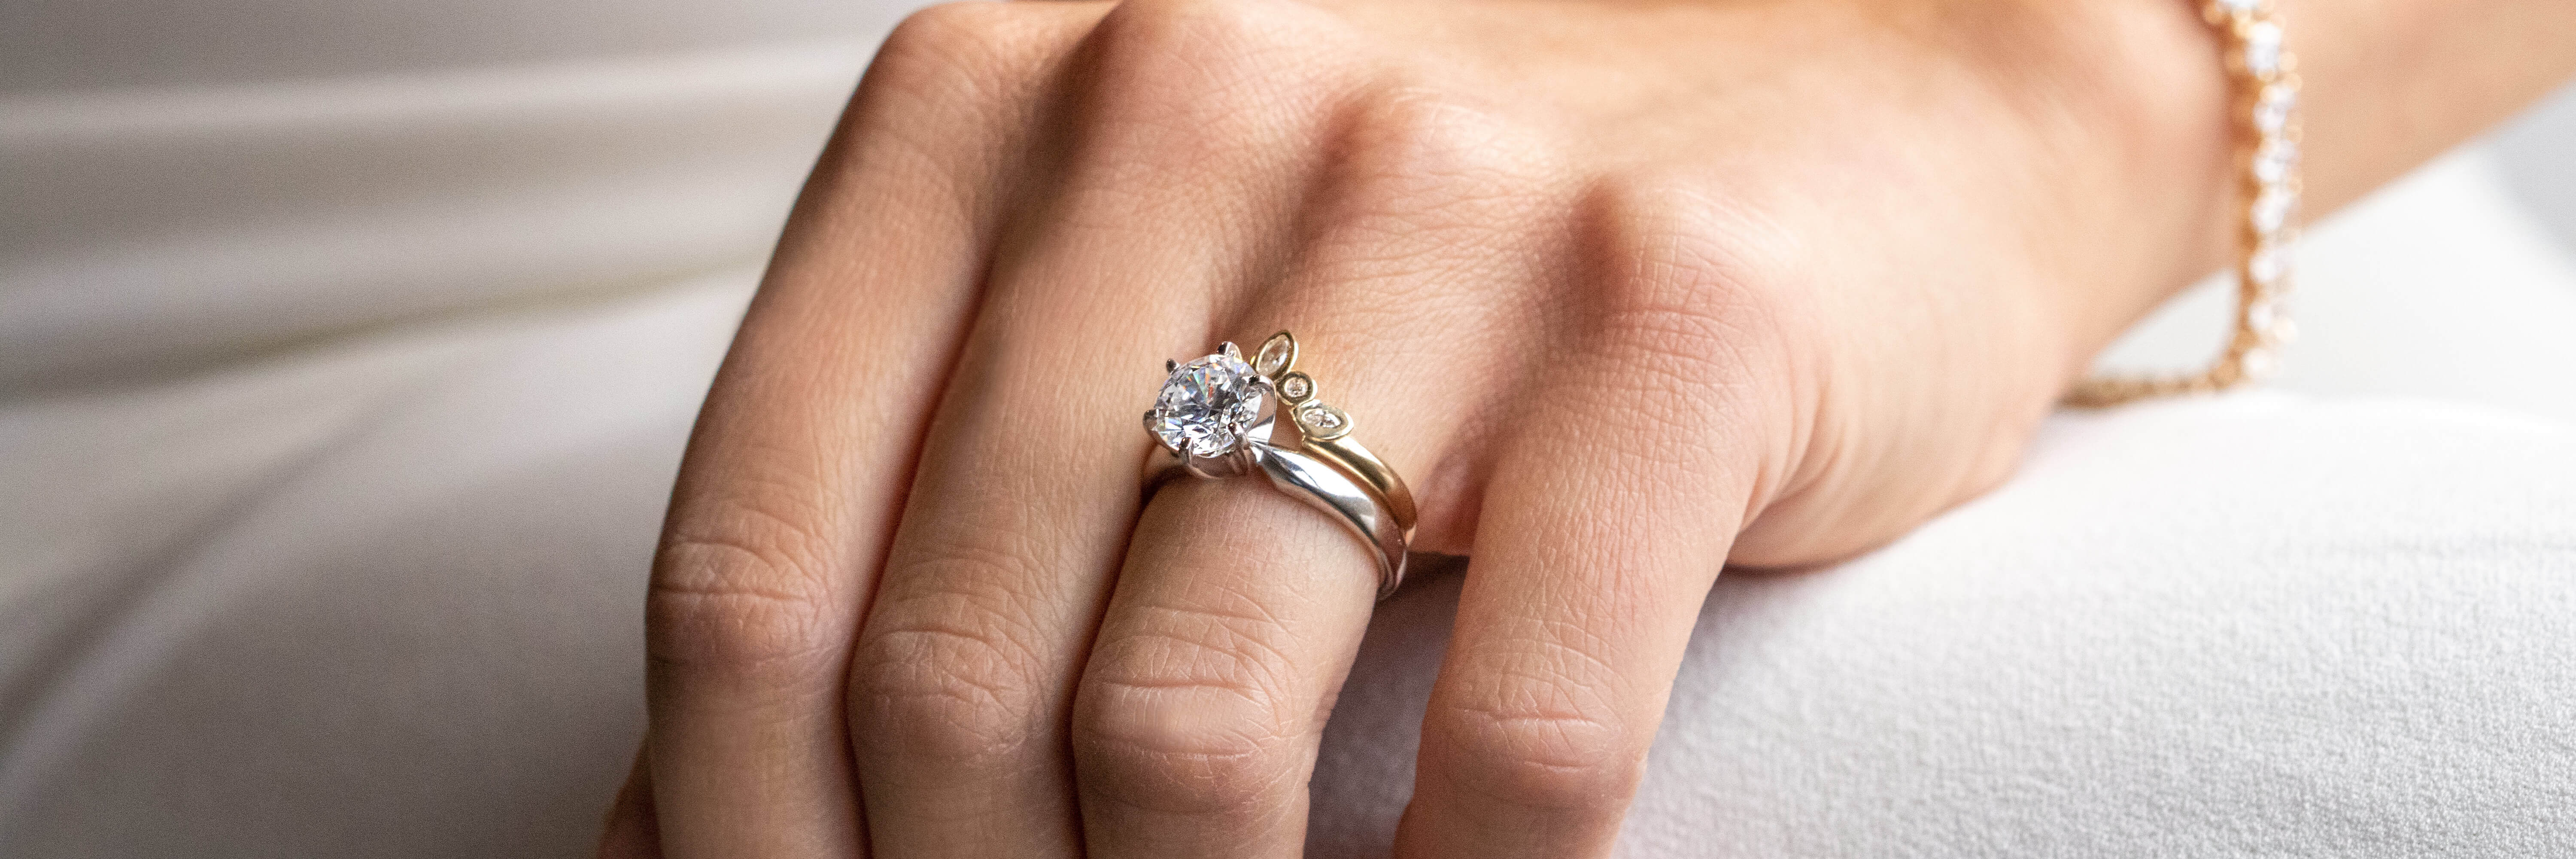 simple solitaire engagement ring with stacked wedding band